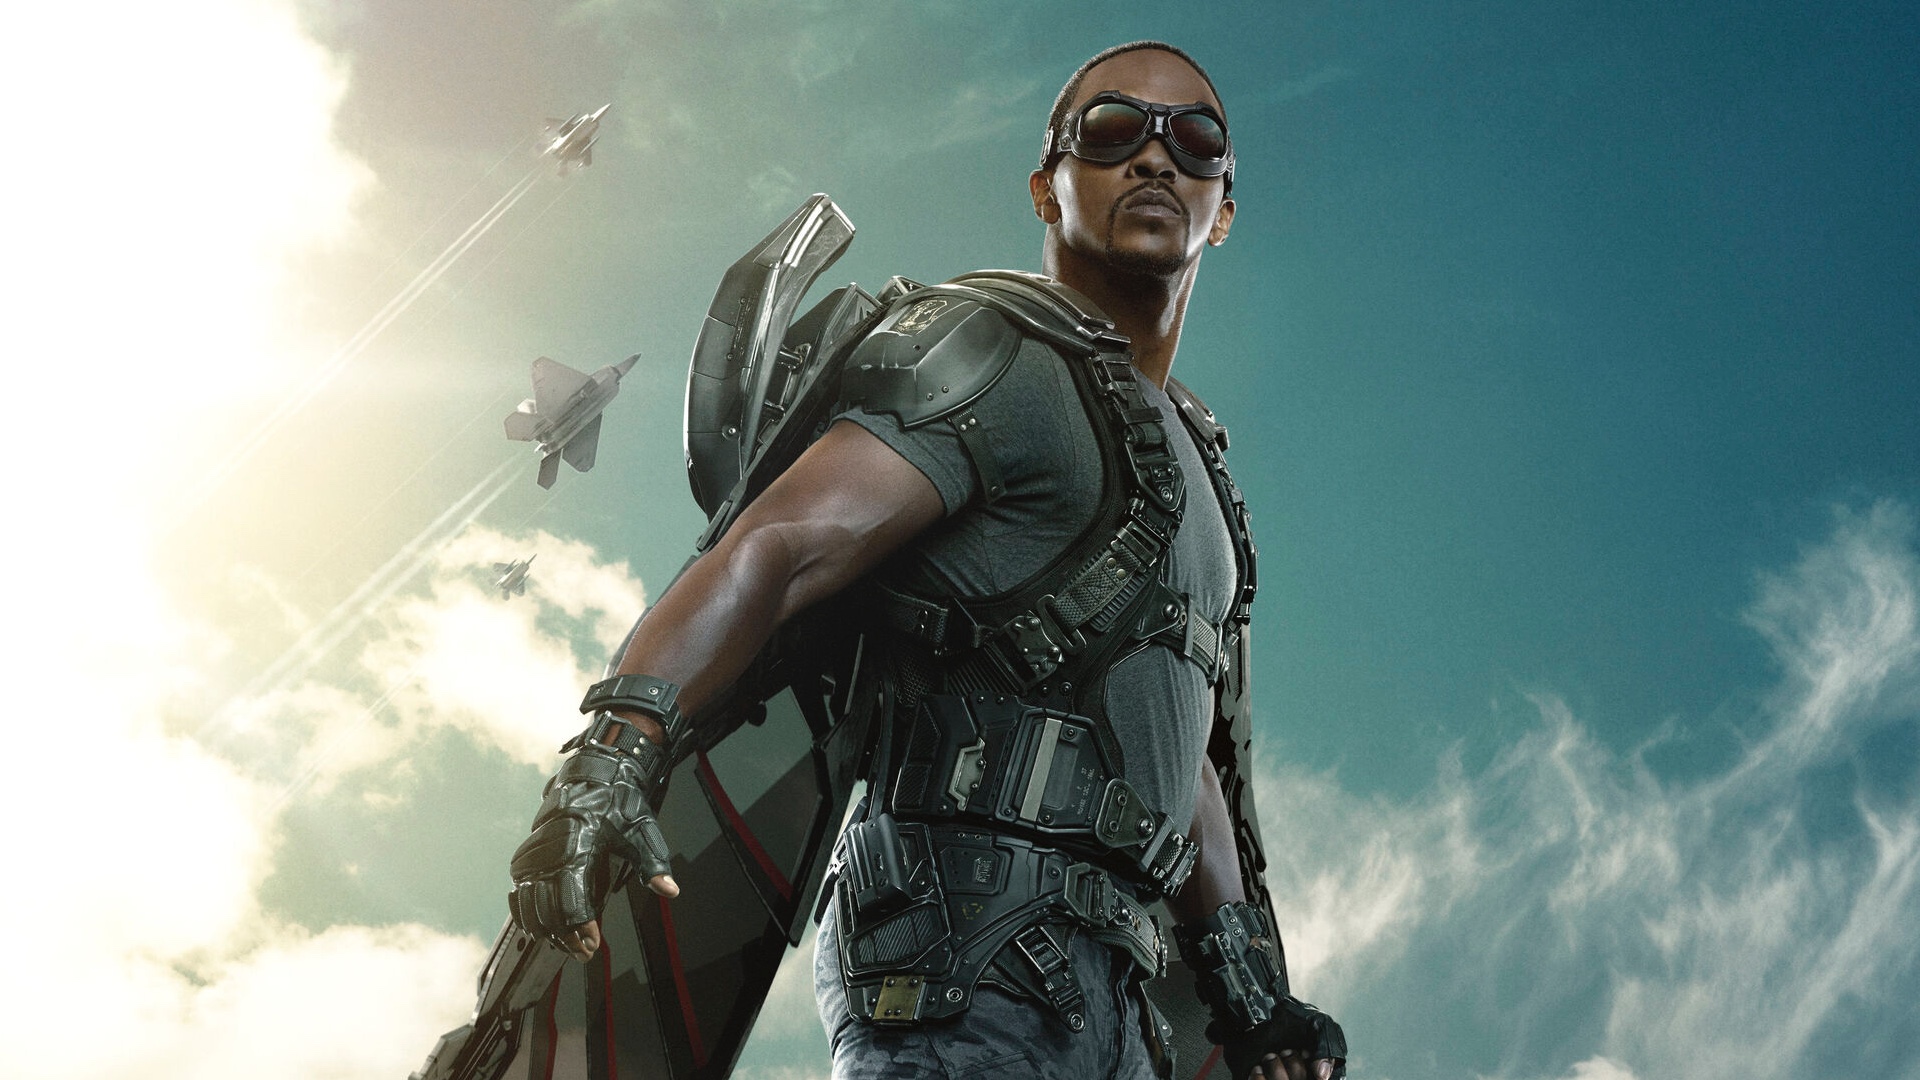 In Captain America: The Winter Soldier Sam Wilson tells Steve he ran like 13 miles in how many minutes?